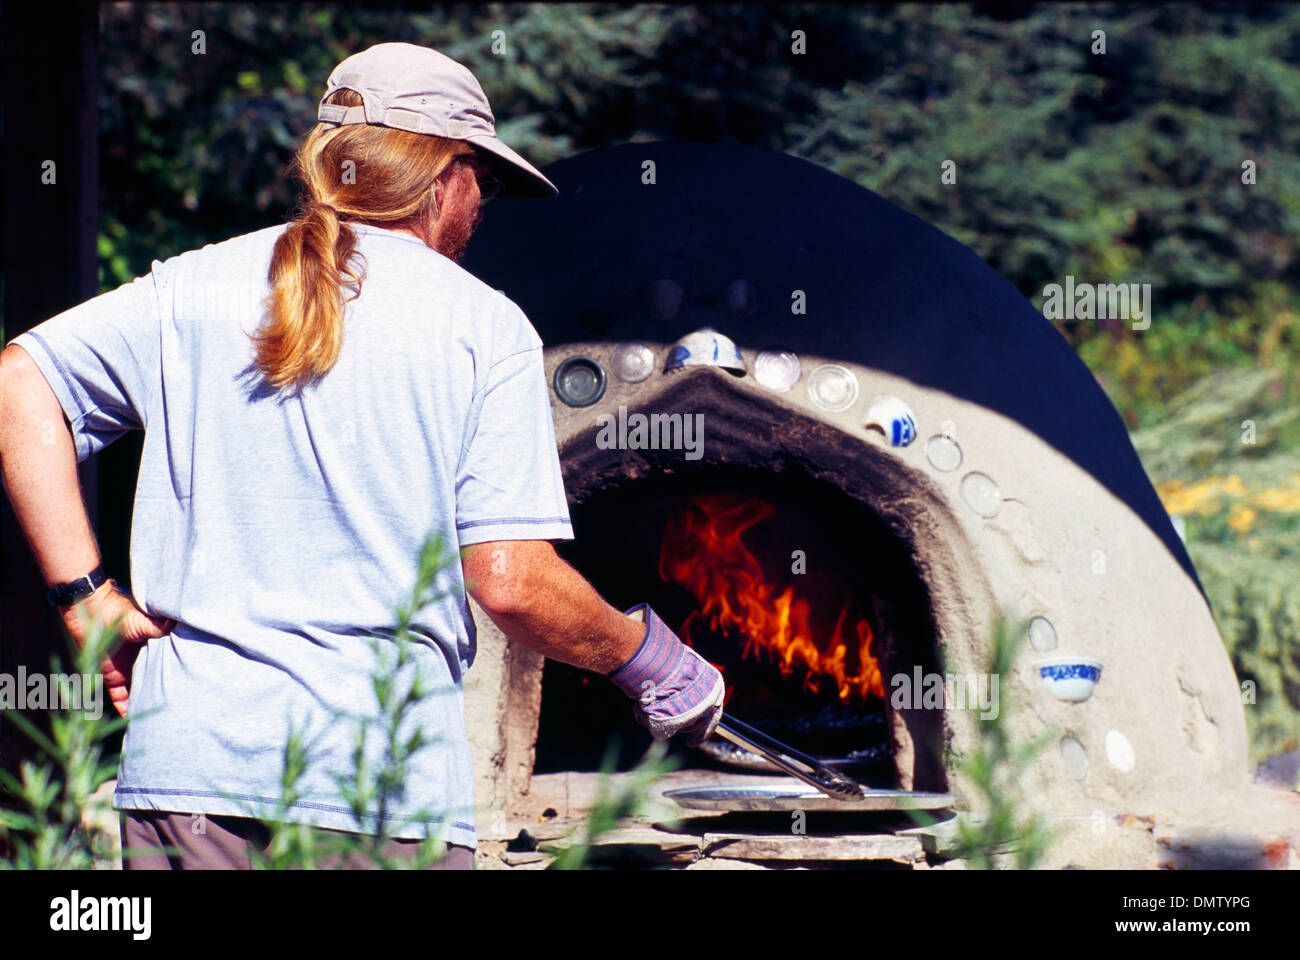 Working Man with a Long Ponytail baking Garlic Bread in Outdoor Wood Fired Cob Oven at Garlic Festival Stock Photo